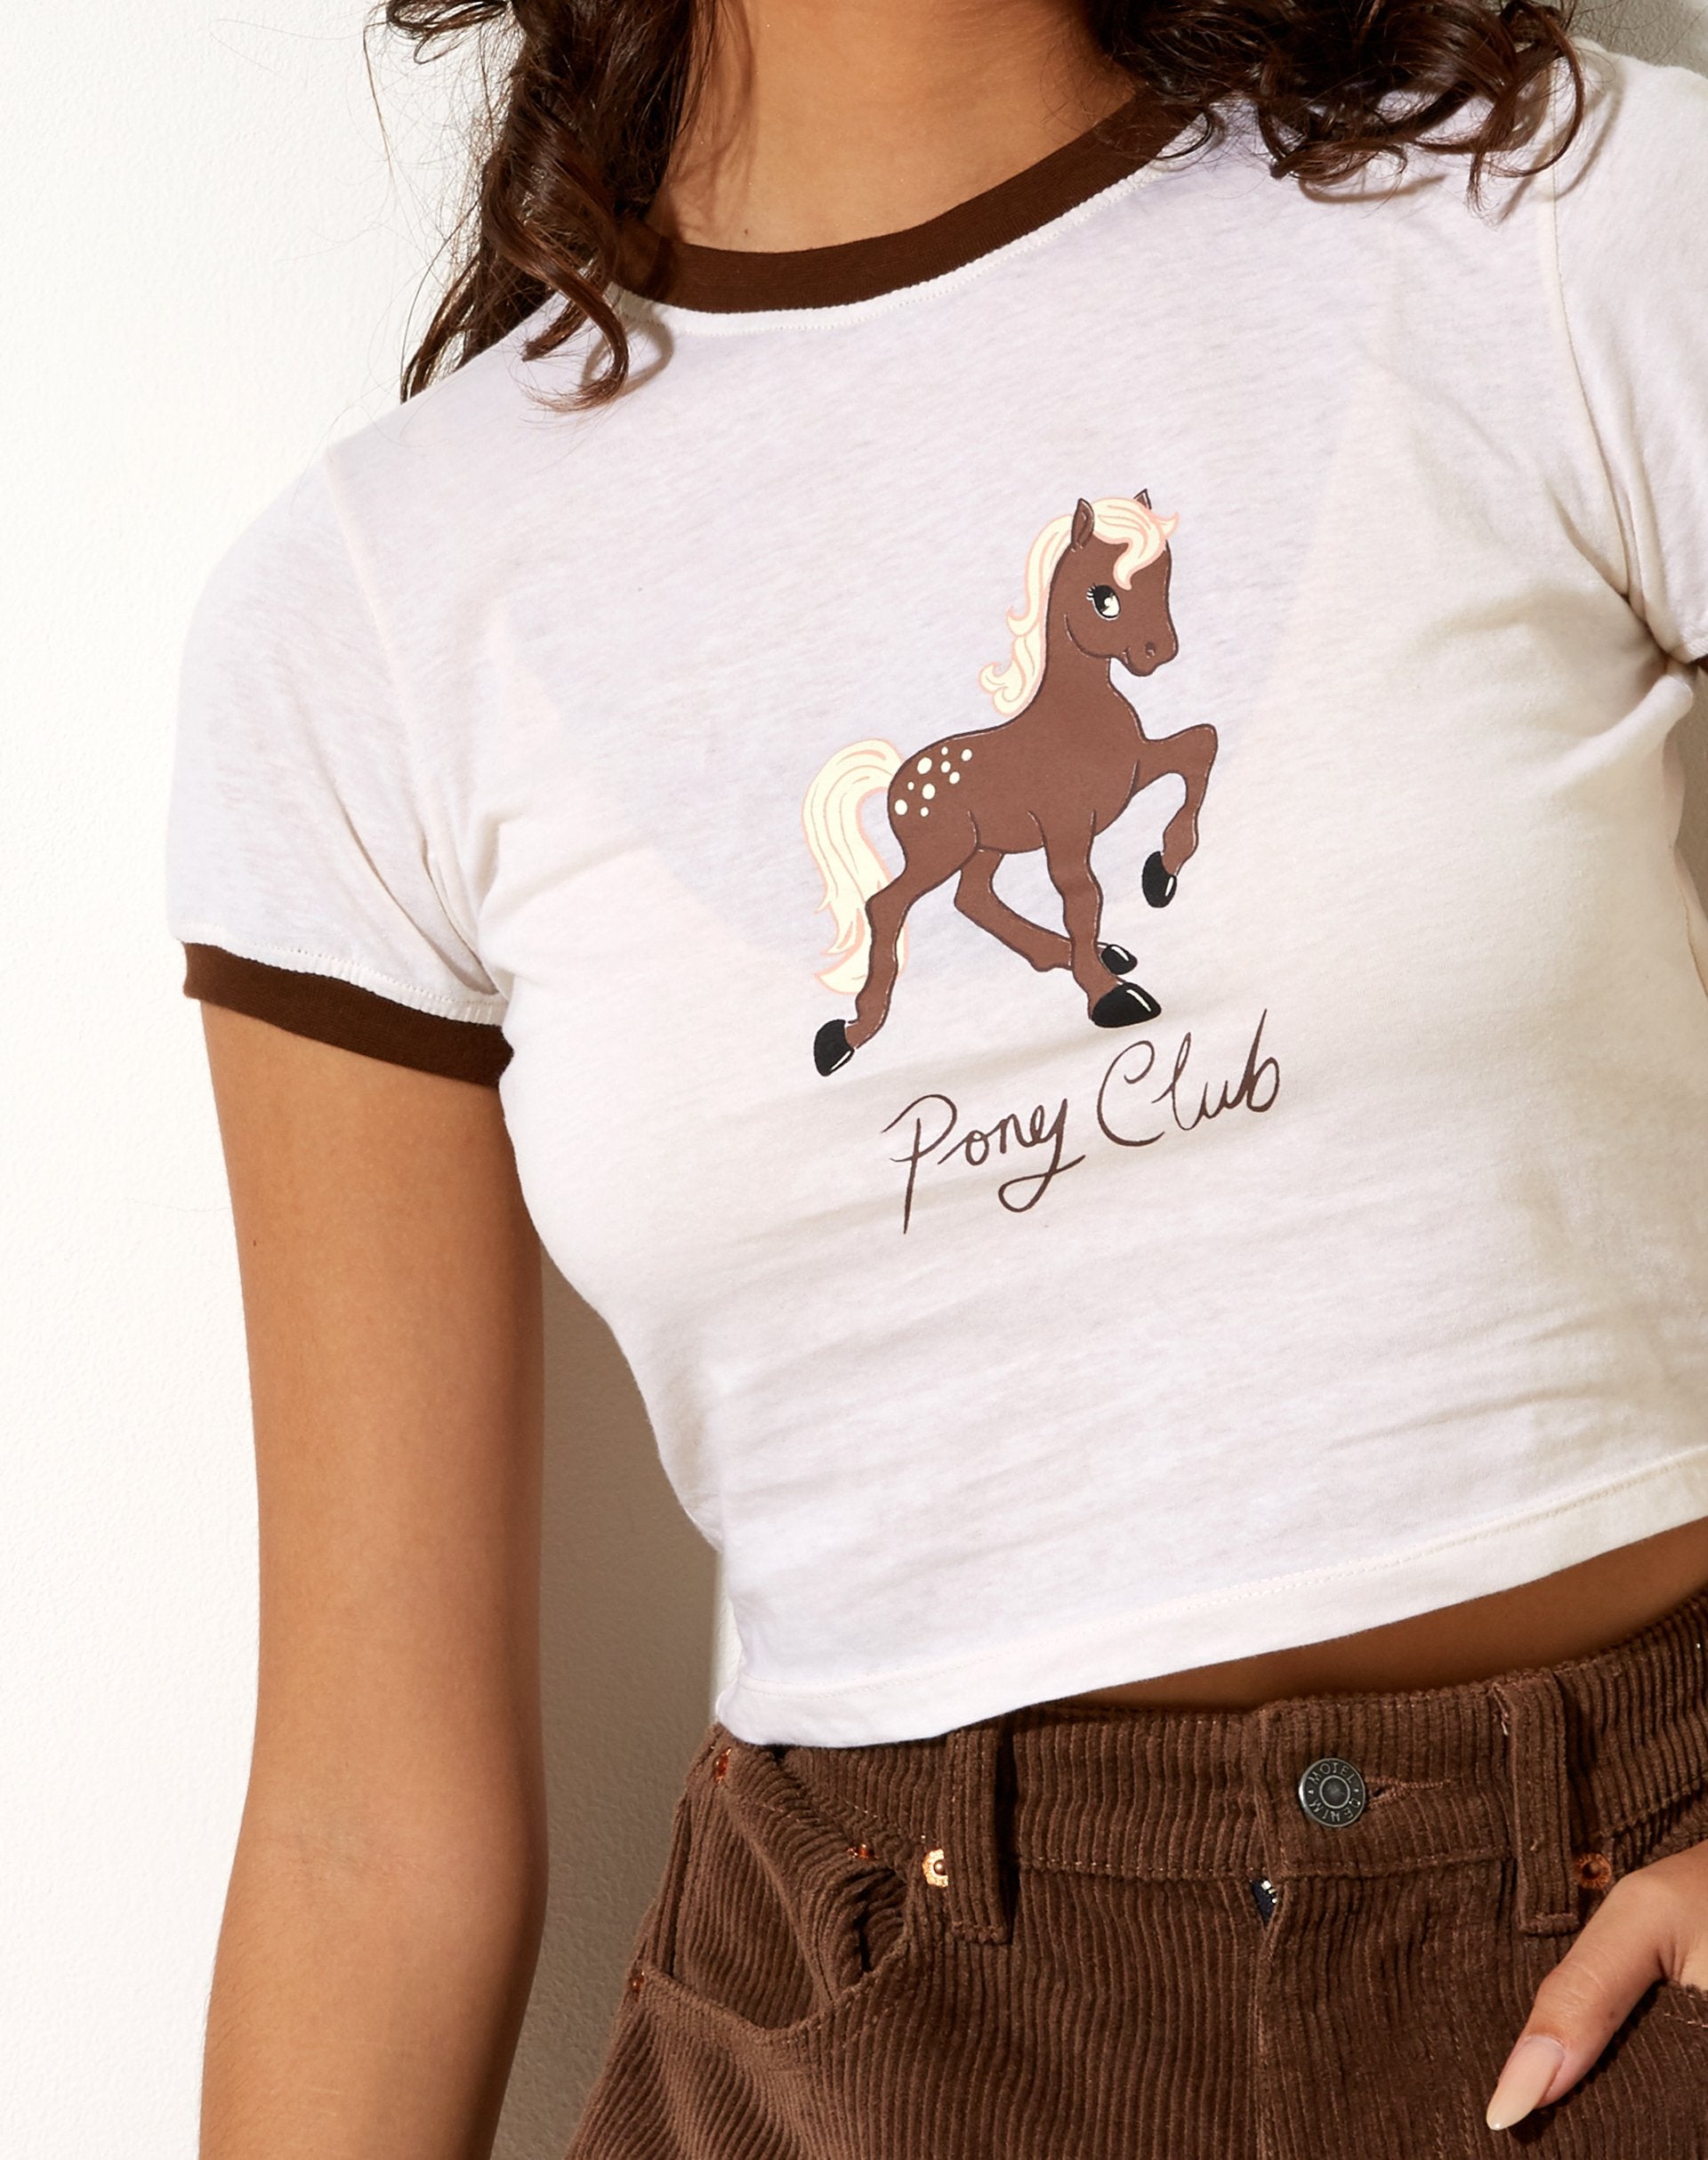 Image of Ringer Tee in Winter White Bind Cocoa Pony Club